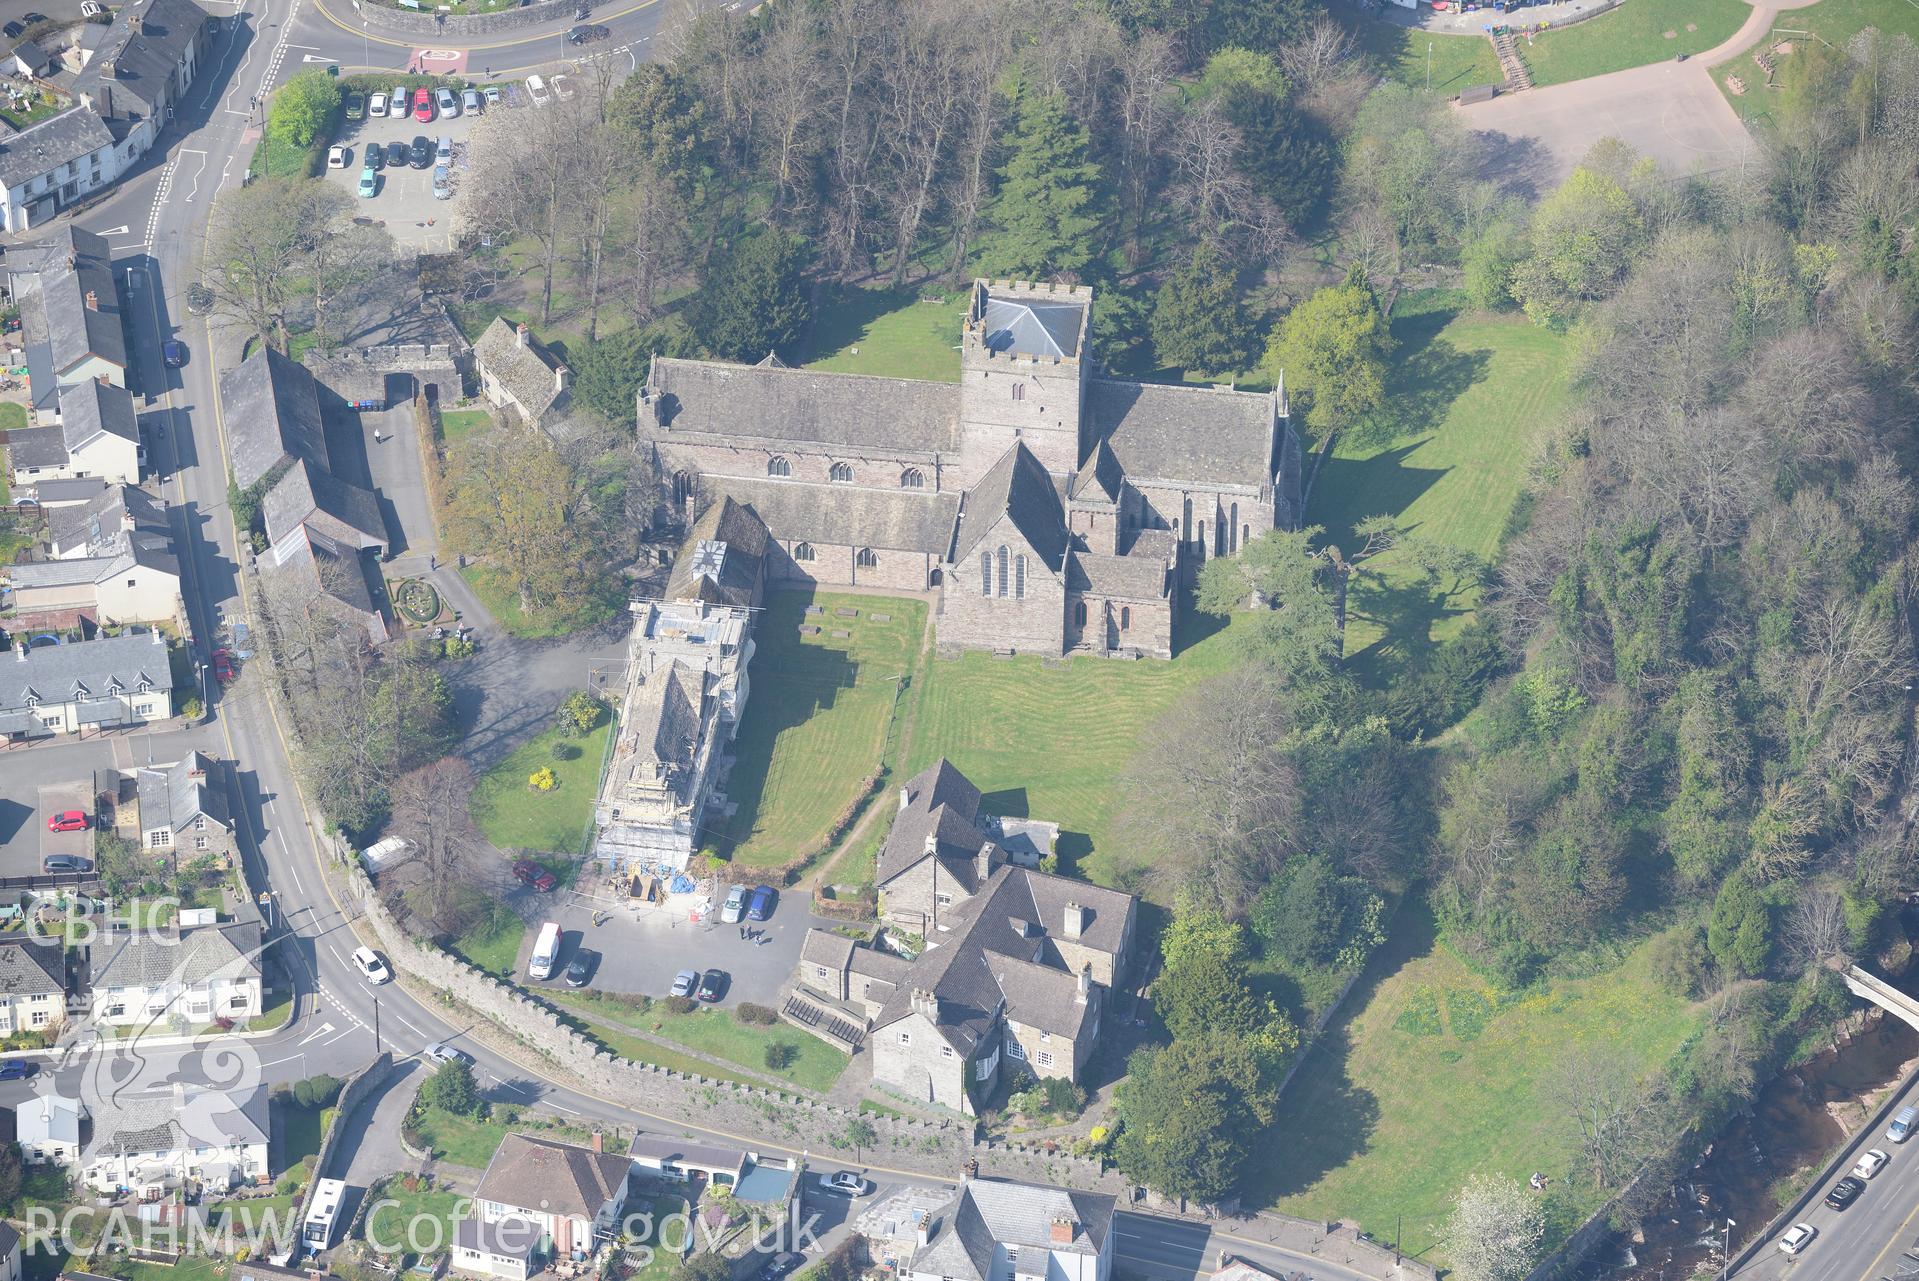 Brecon Cathedral, Canonry, Chapter House, Clergy House, Deanery, Priory and Almonry. Oblique aerial photograph taken during the Royal Commission's programme of archaeological aerial reconnaissance by Toby Driver on 21st April 2015